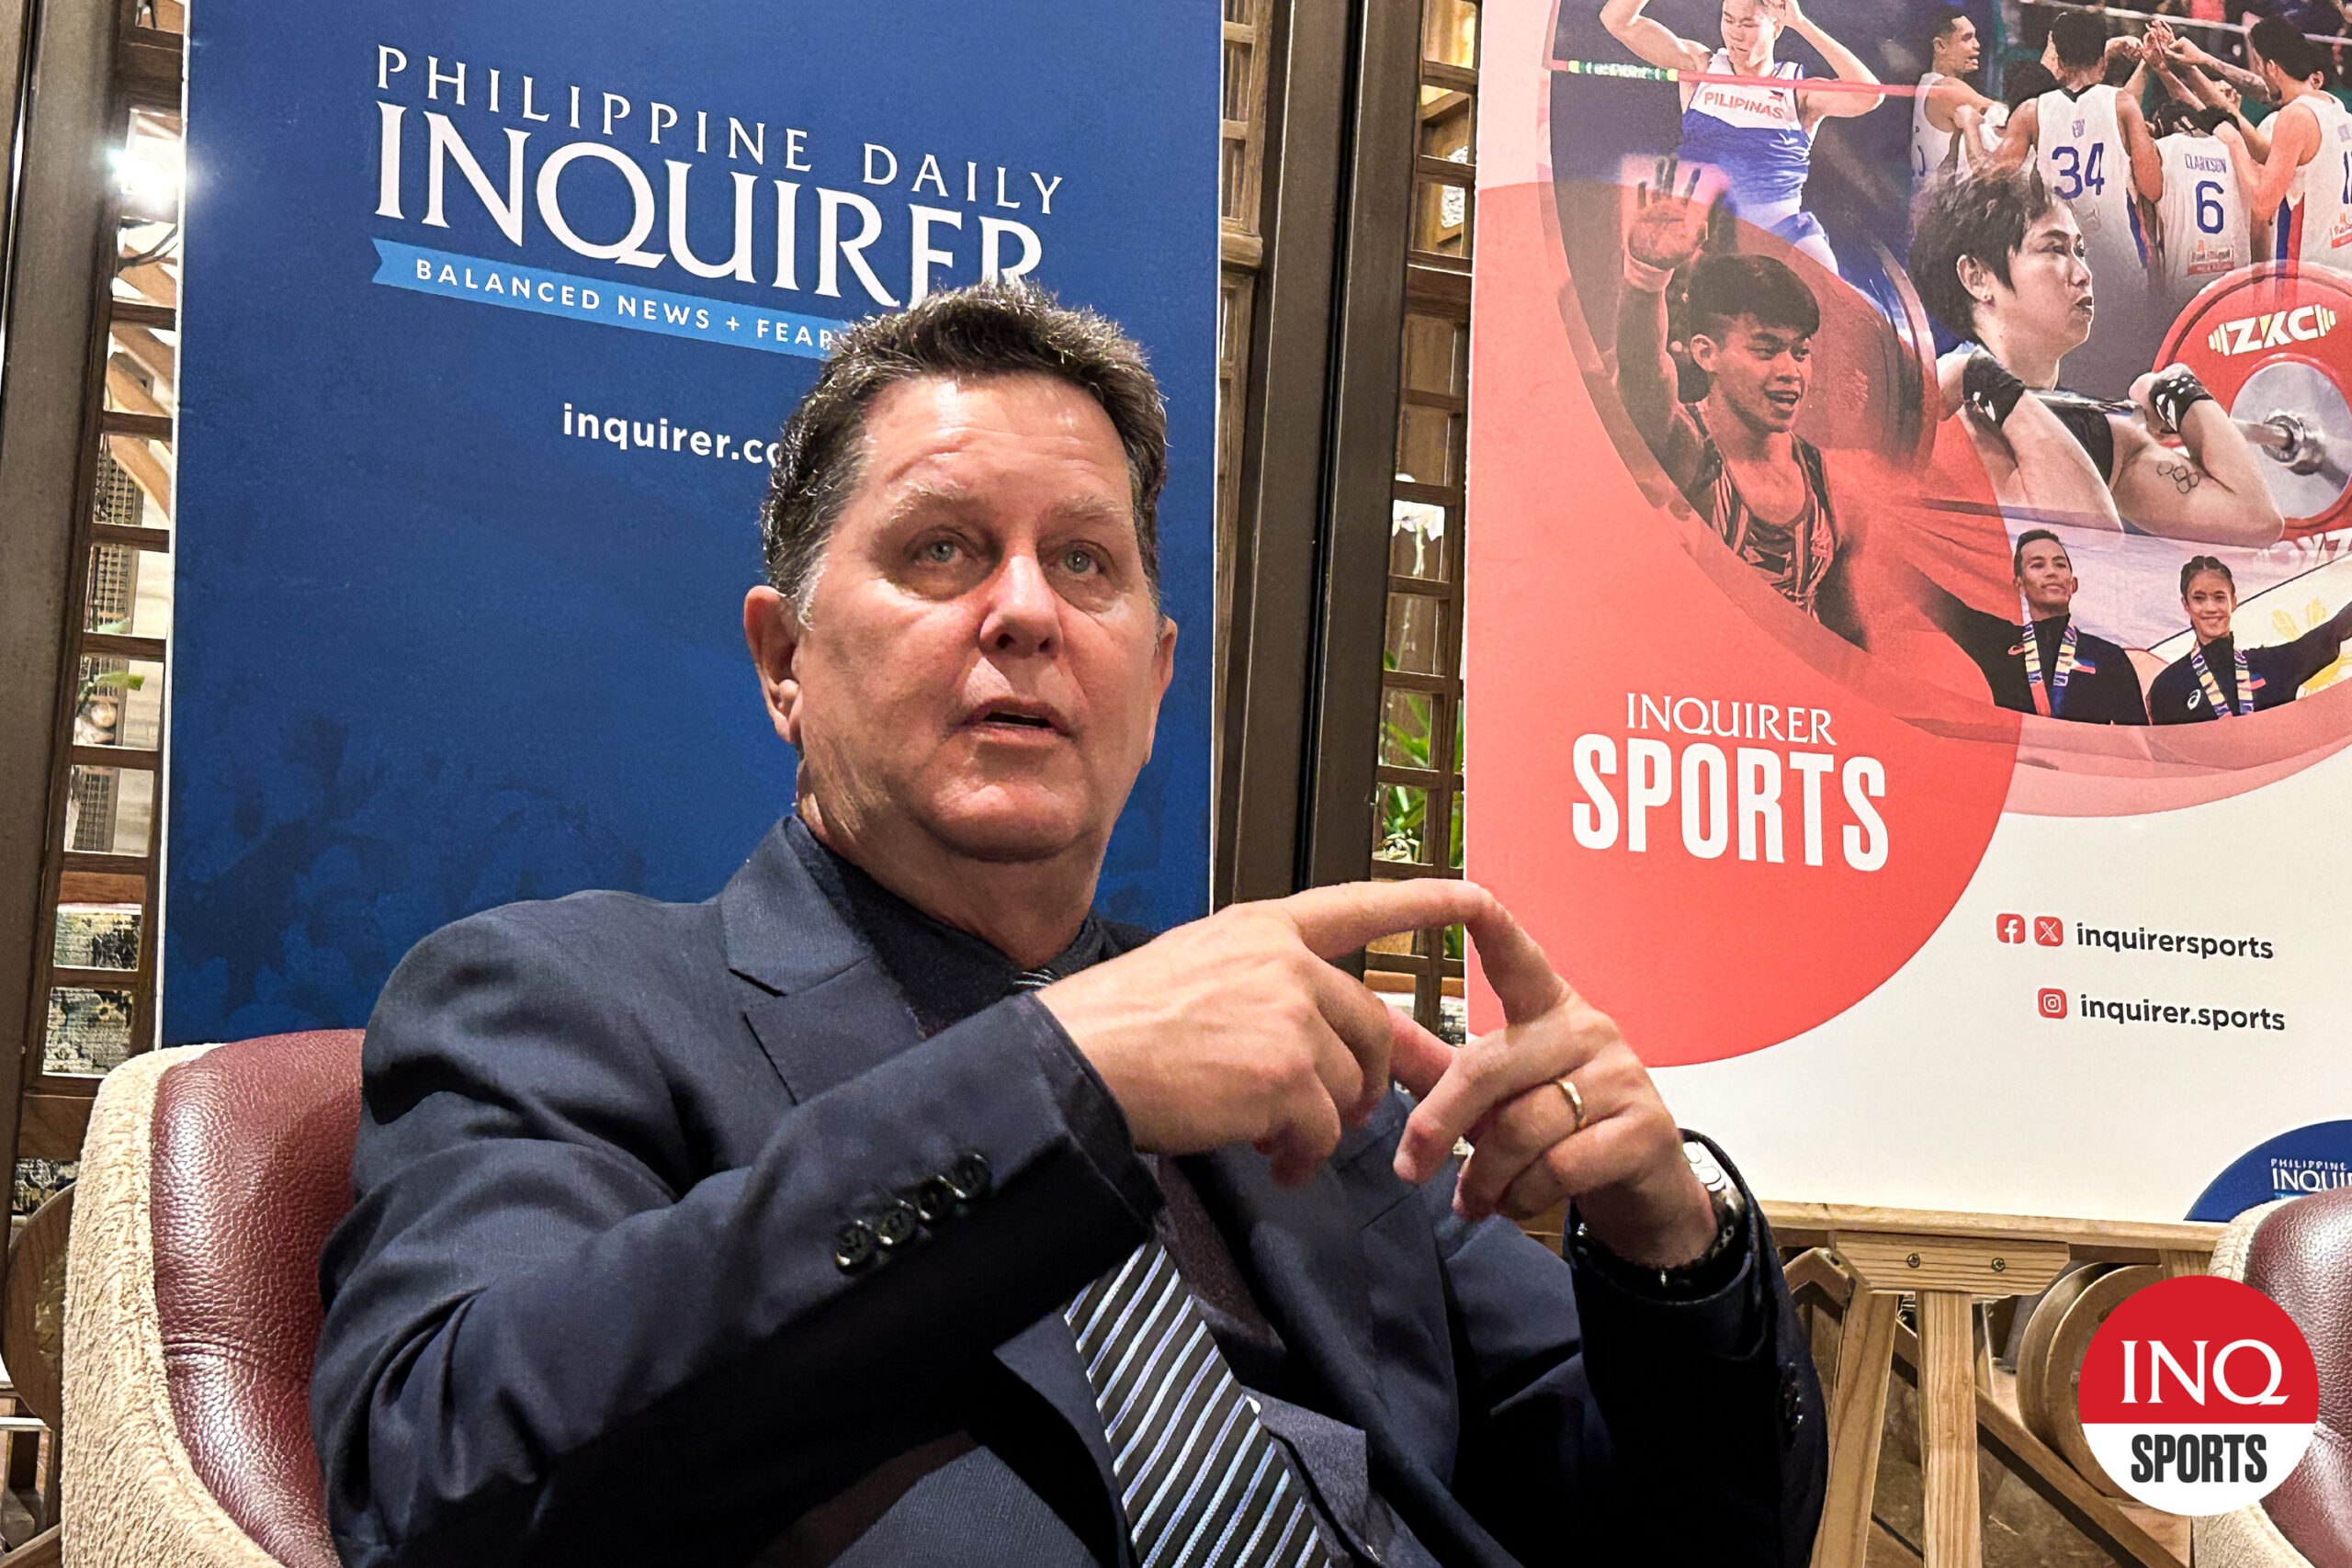 Tim Cone talks to the InquirerSports staff during an
awards dinner in his honor.